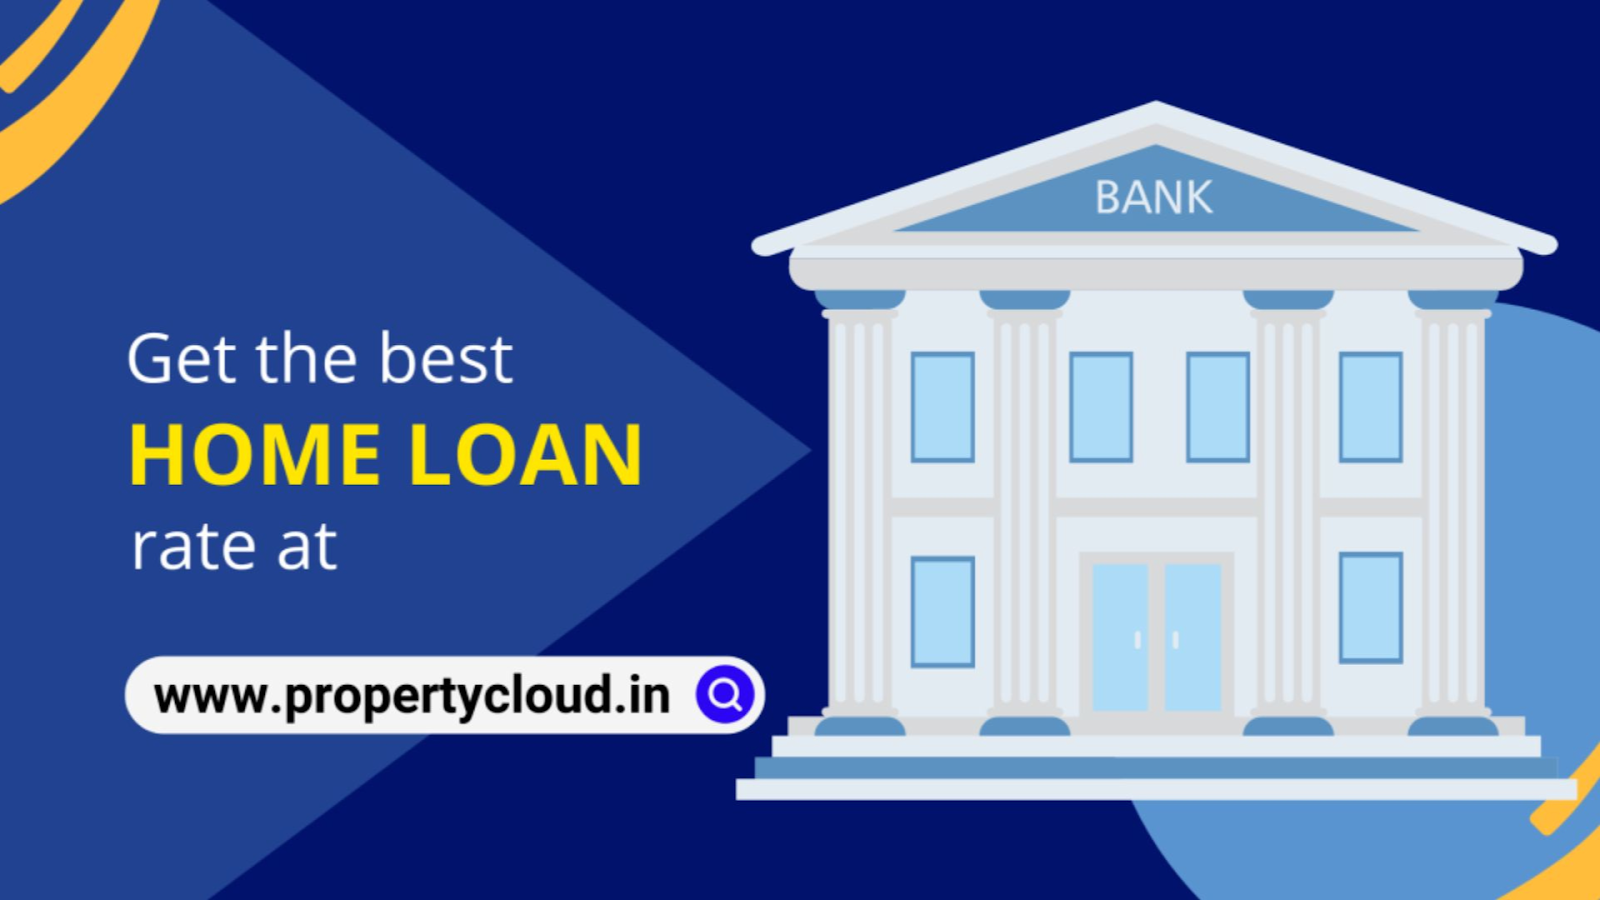 Get in touch with PropertyCloud, to get the best advice related to home loans at the best rate of interest.